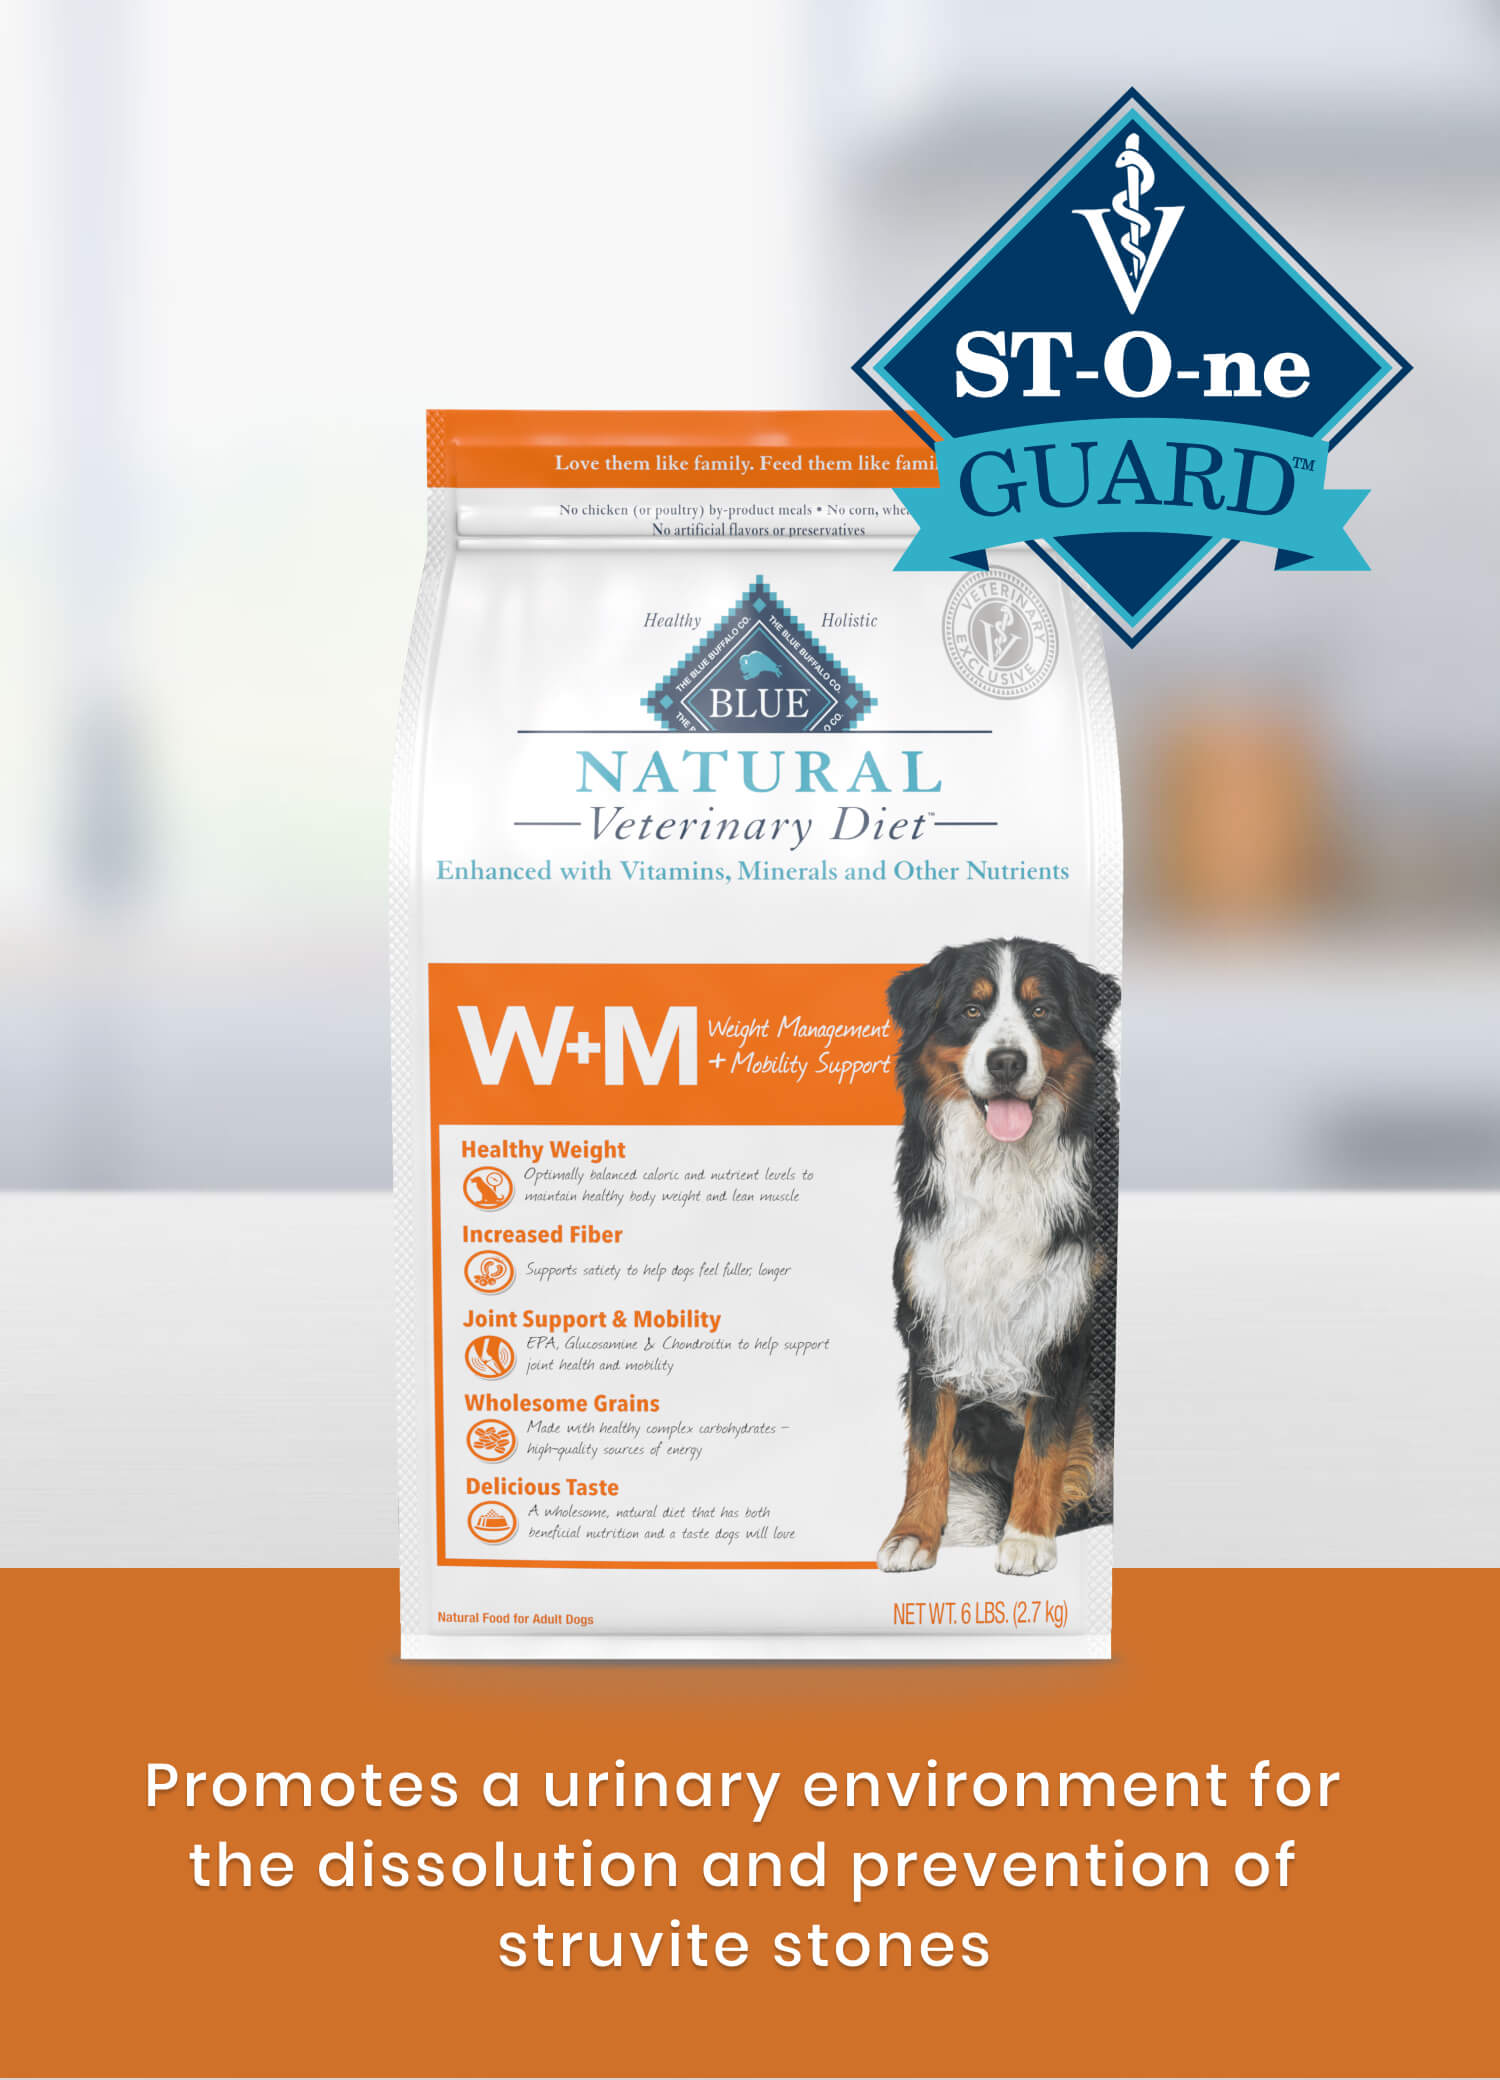 W+M Weight Management + Mobility Support St-O-ne Guard Promotes a urinary environment for the dissolution and prevention of struvite stones